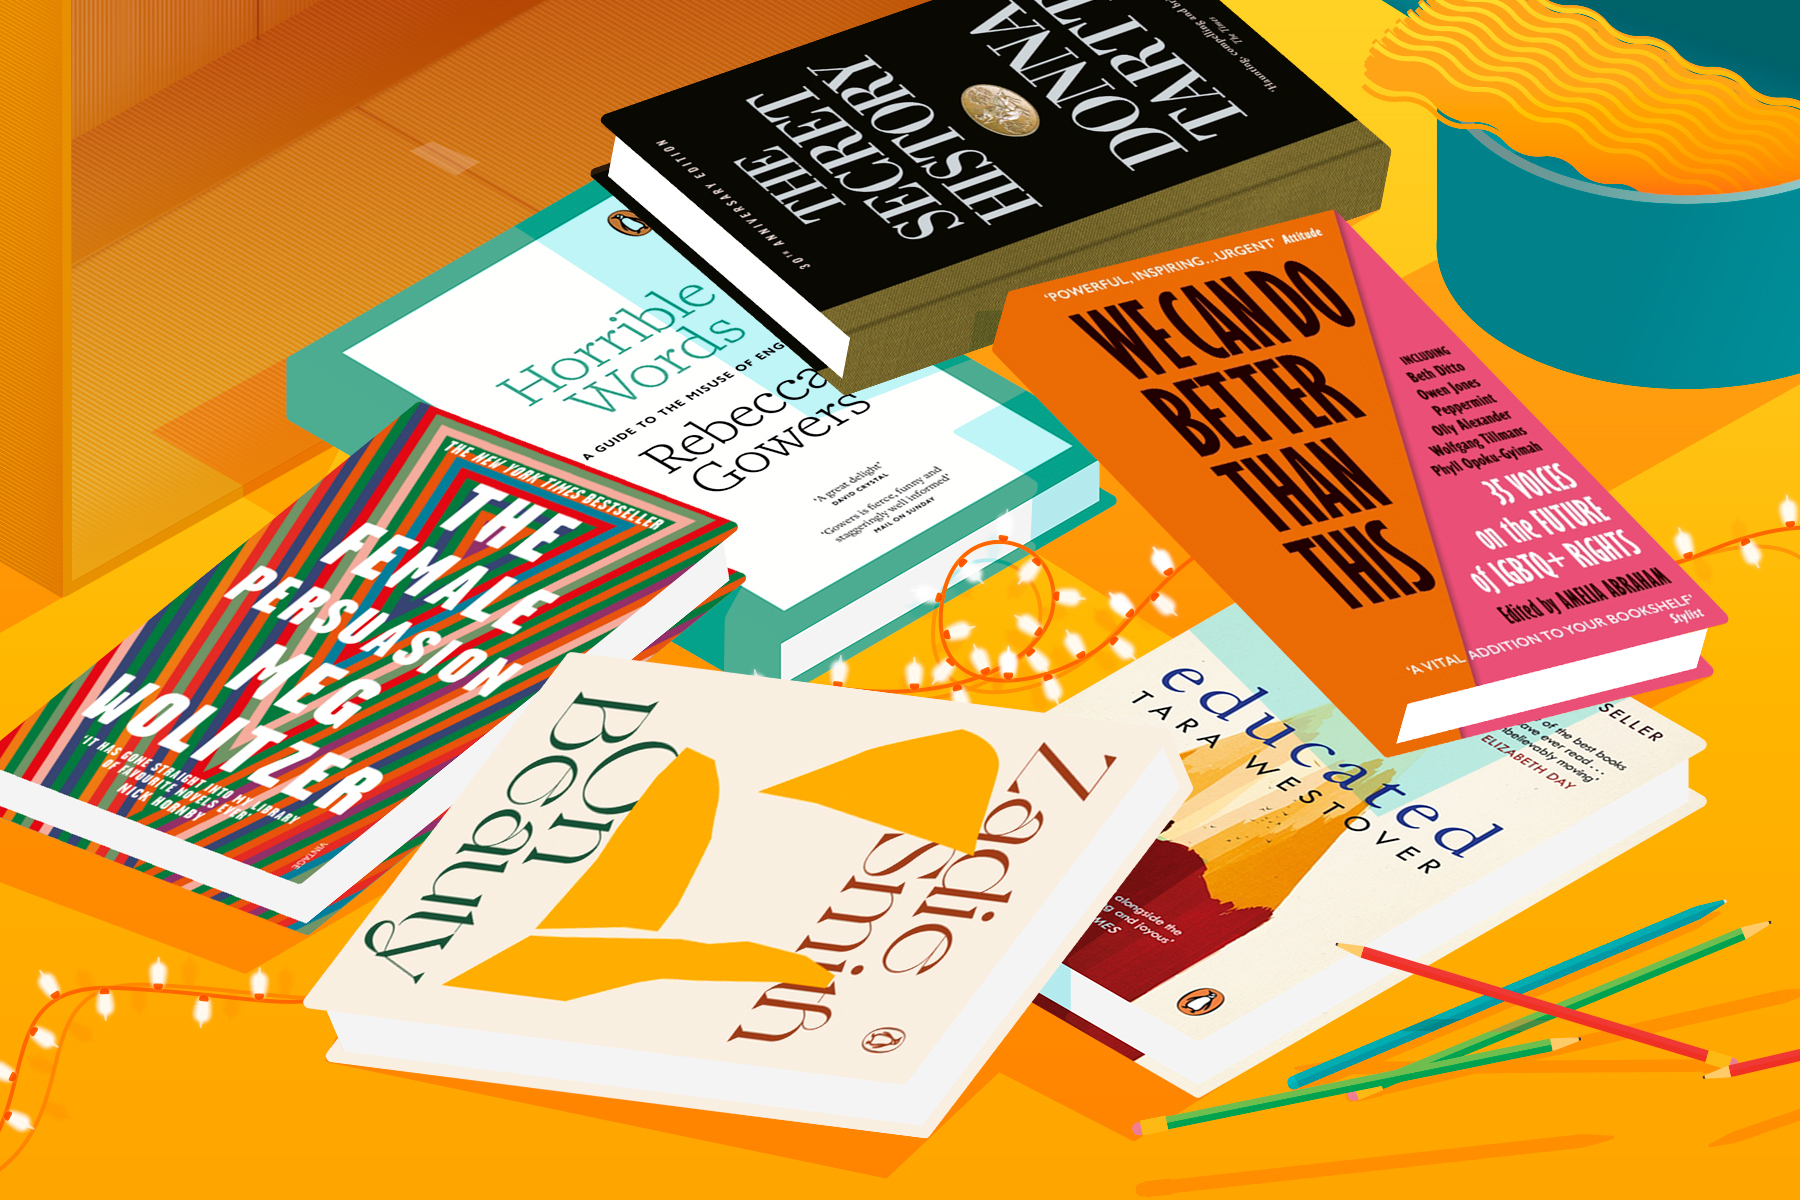 Illustration of a selection of books on the floor on an orange background